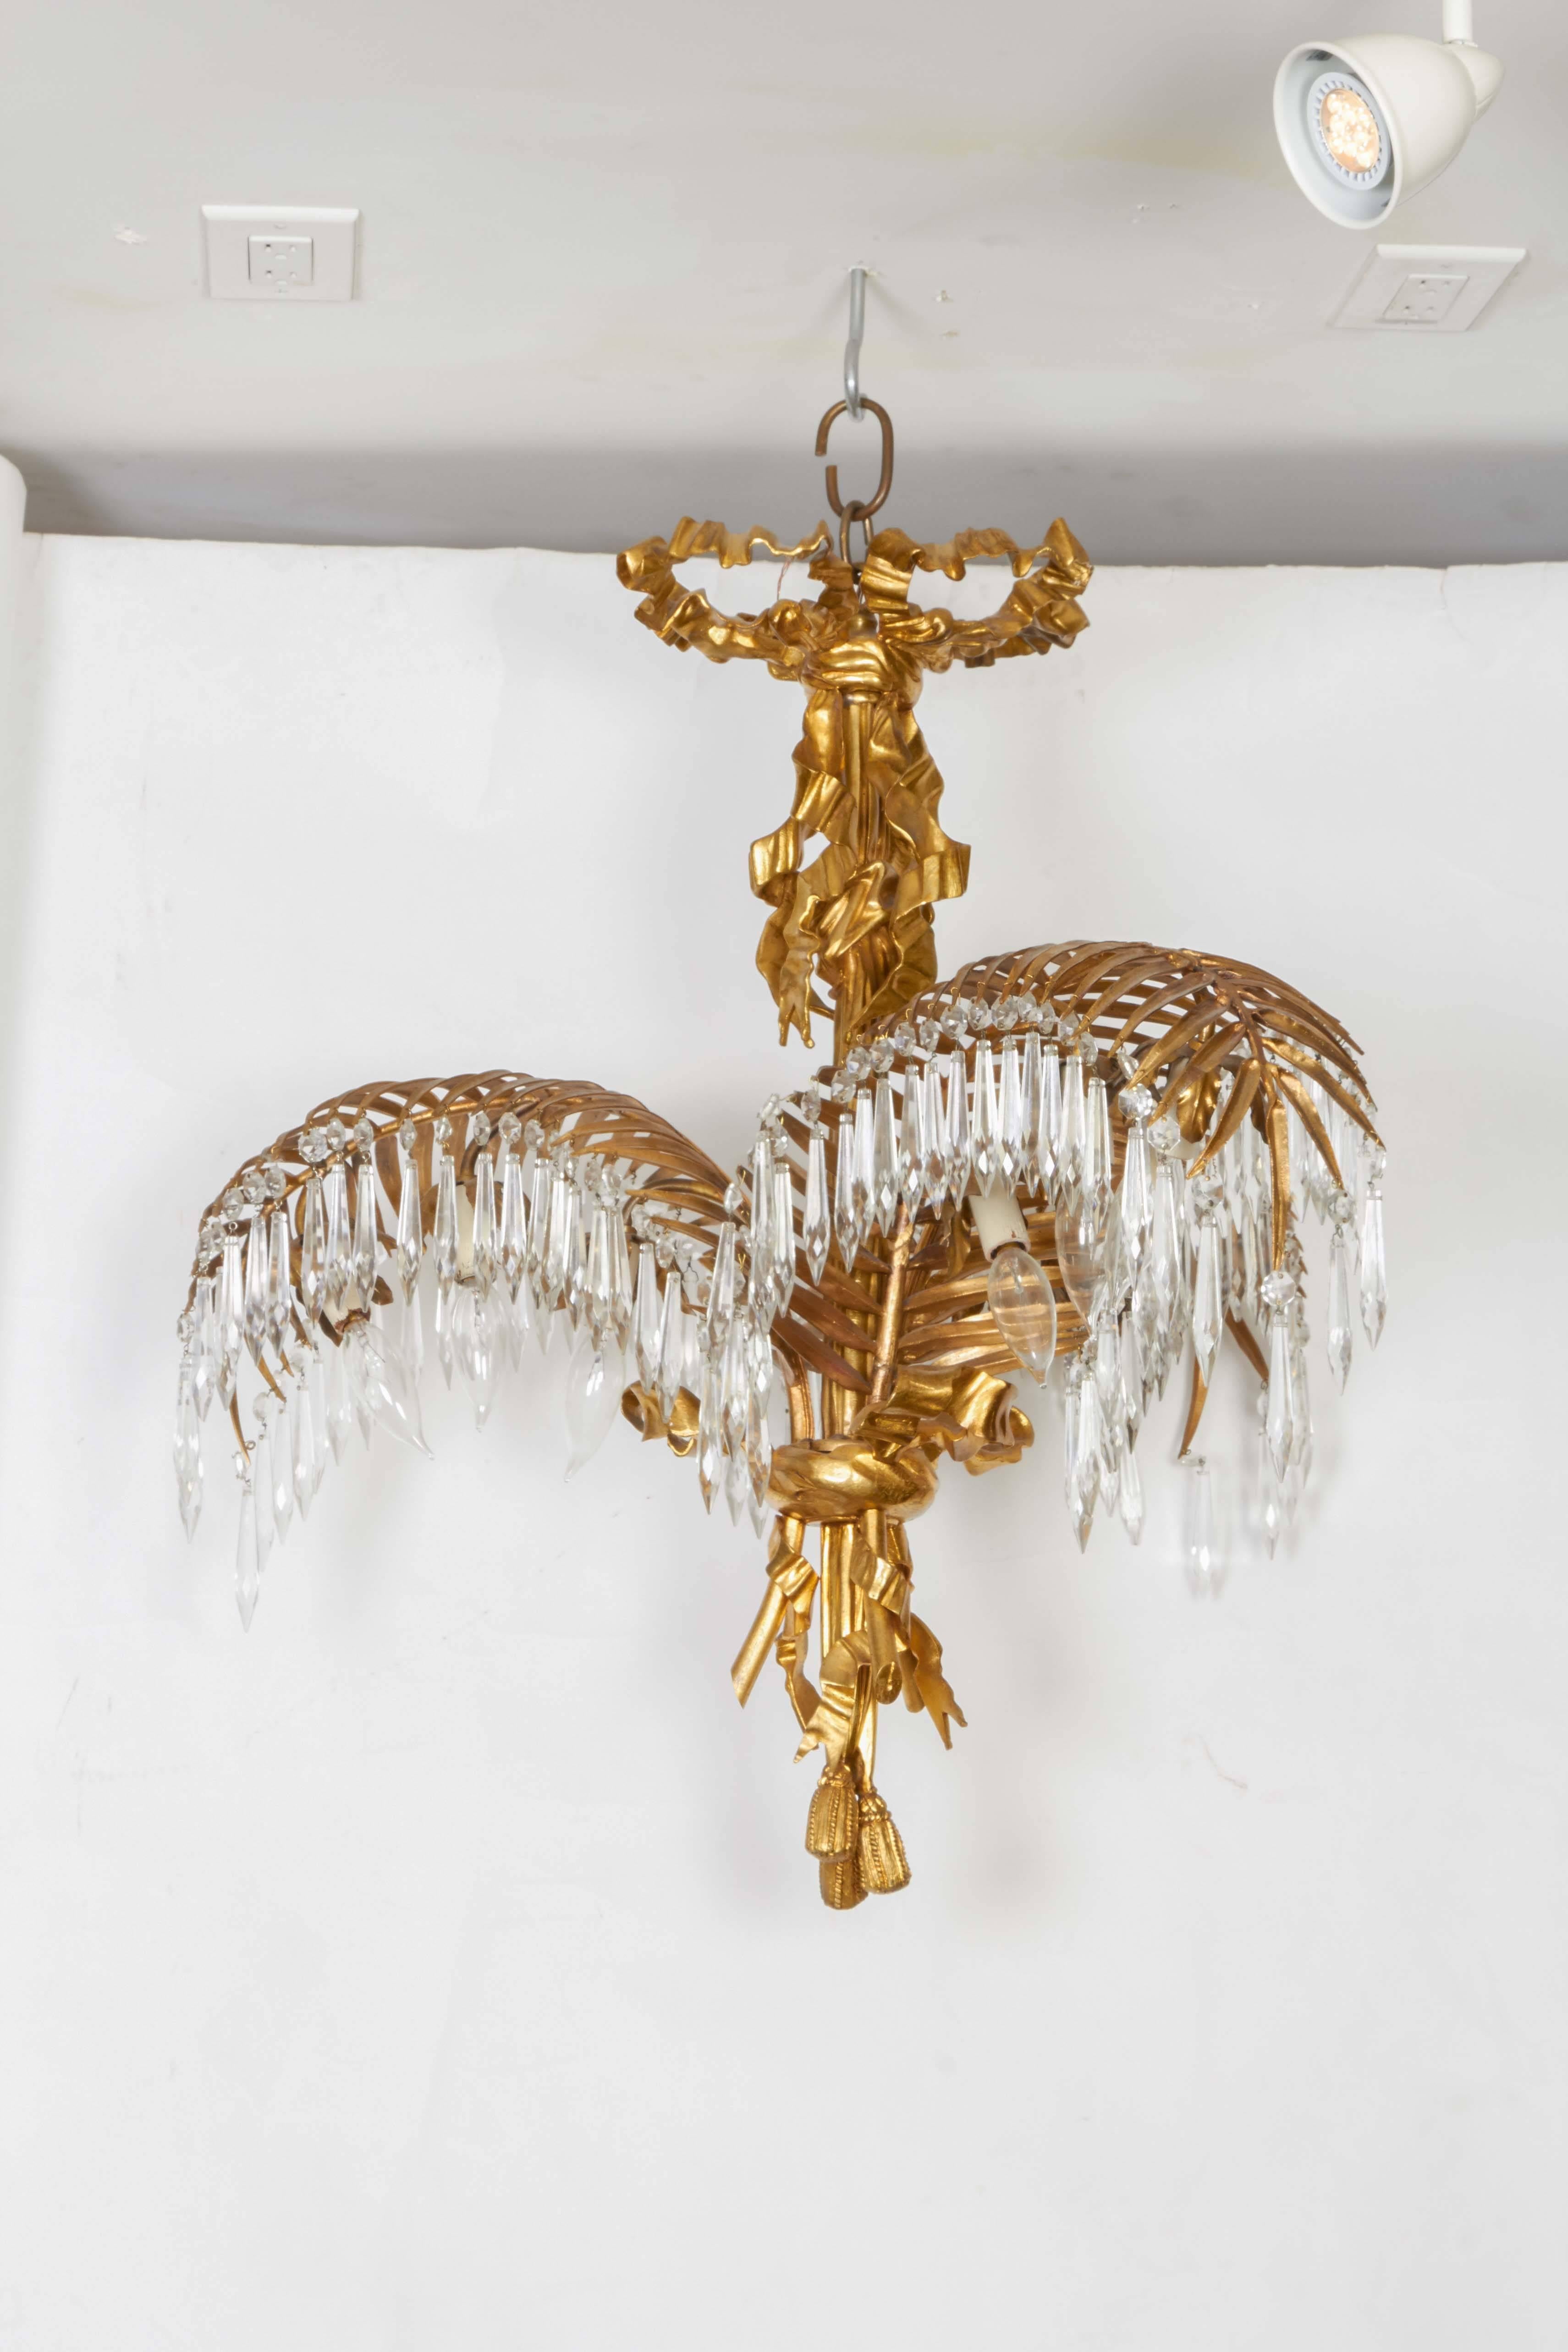 A French gilt bronze palm frond chandelier, the stem surmounted by ribbon tied spray and issuing three ornate palm branches suspending crystal prisms and concealing 9 Edison sockets (3 to each branch), with tassel finial.